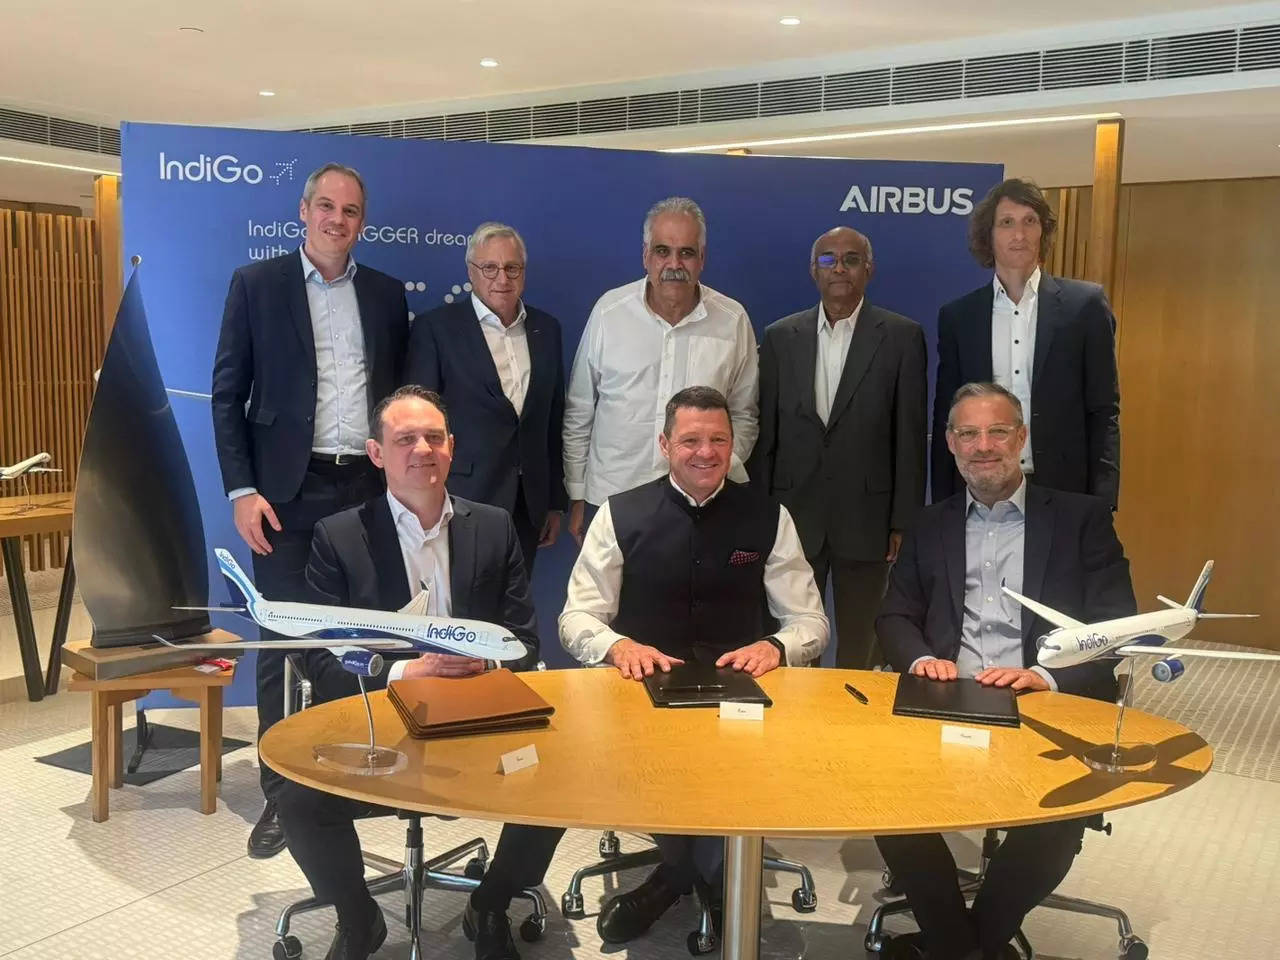 Flight to long haul: IndiGo places order for 30 Airbus wide-body aircraft